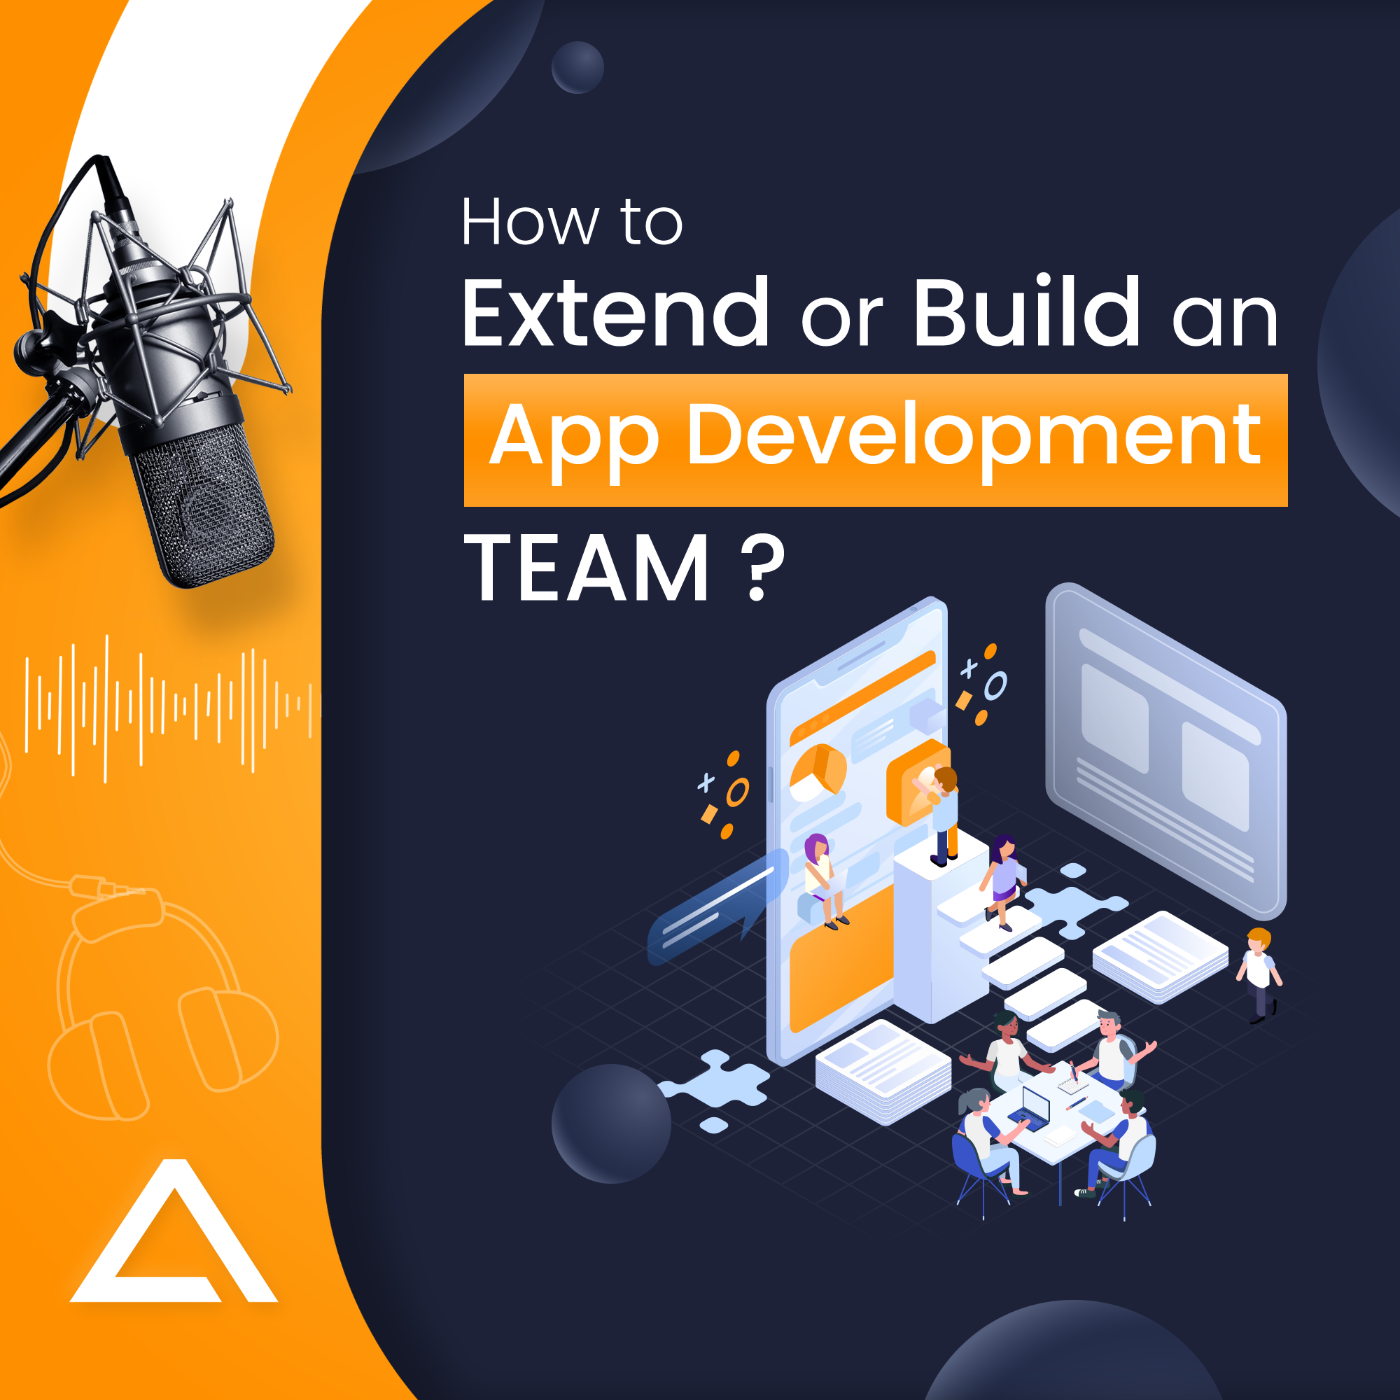 How to Extend or Build an App Development Team? Podcast